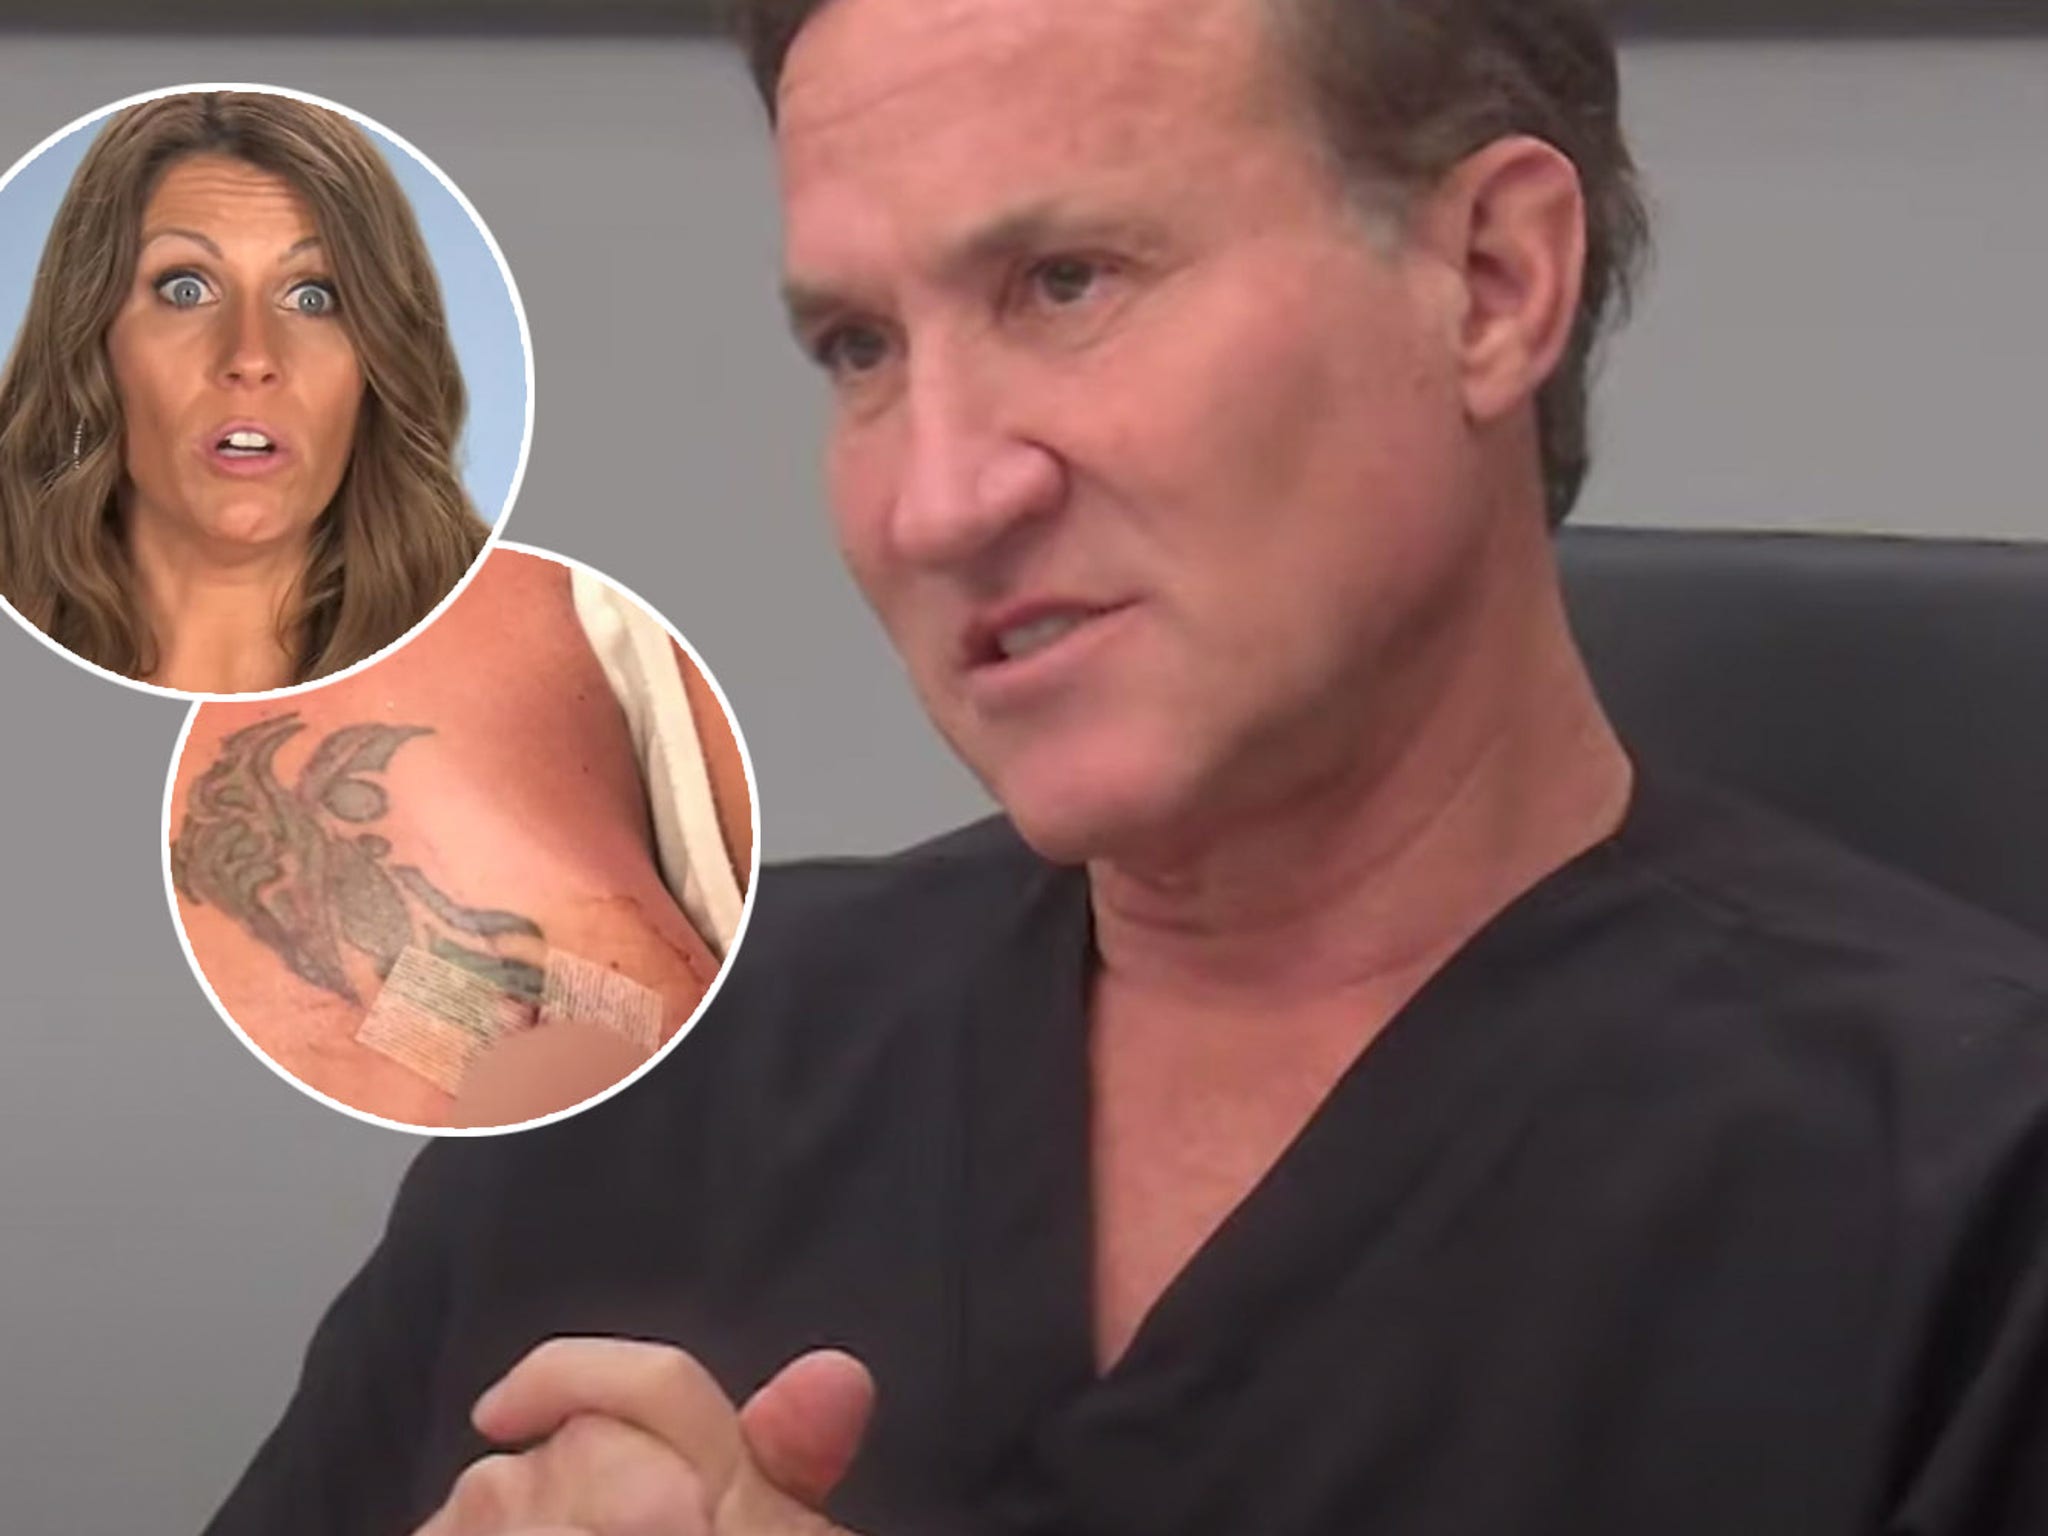 Plastic Surgeon Reacts to BOTCHED! UNIBOOB After Breast Implant